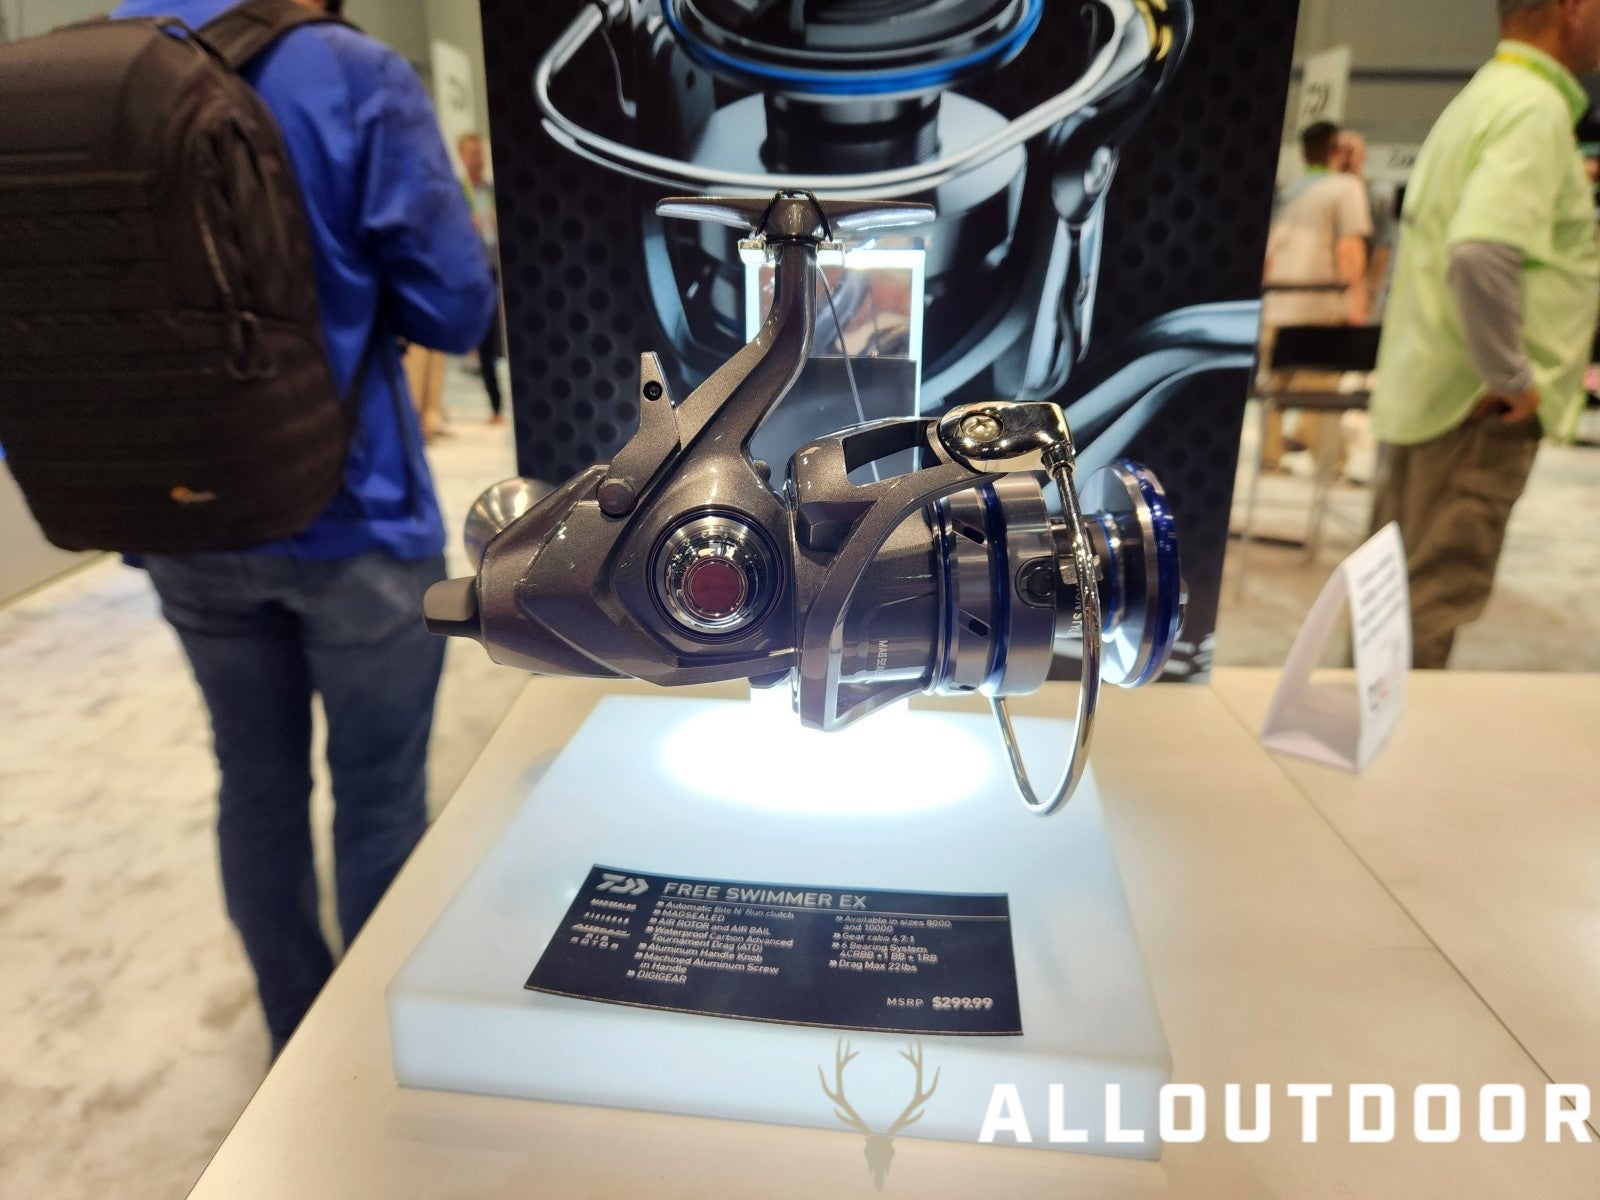 [ICAST 2023]The New Free Swimmer EX from Daiwa